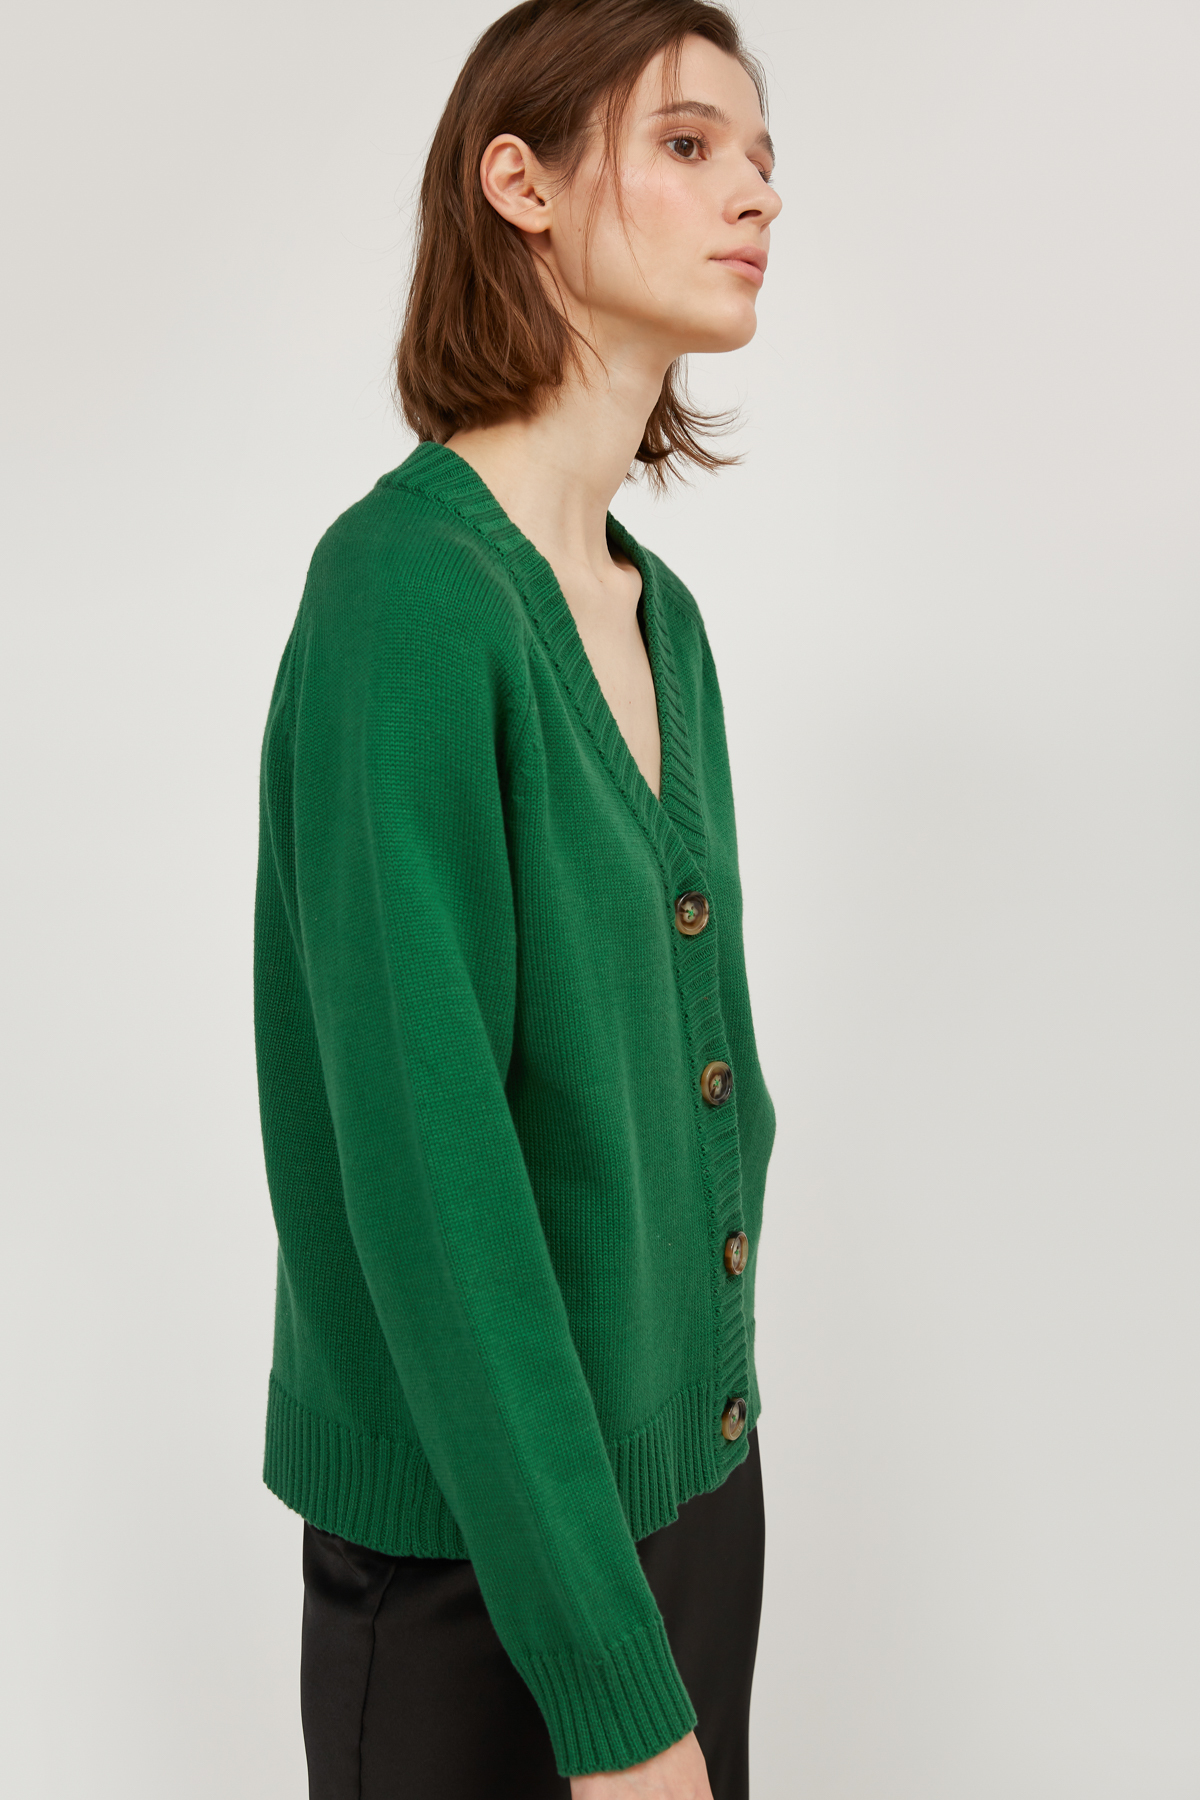 Green cropped knitted cardigan, photo 3